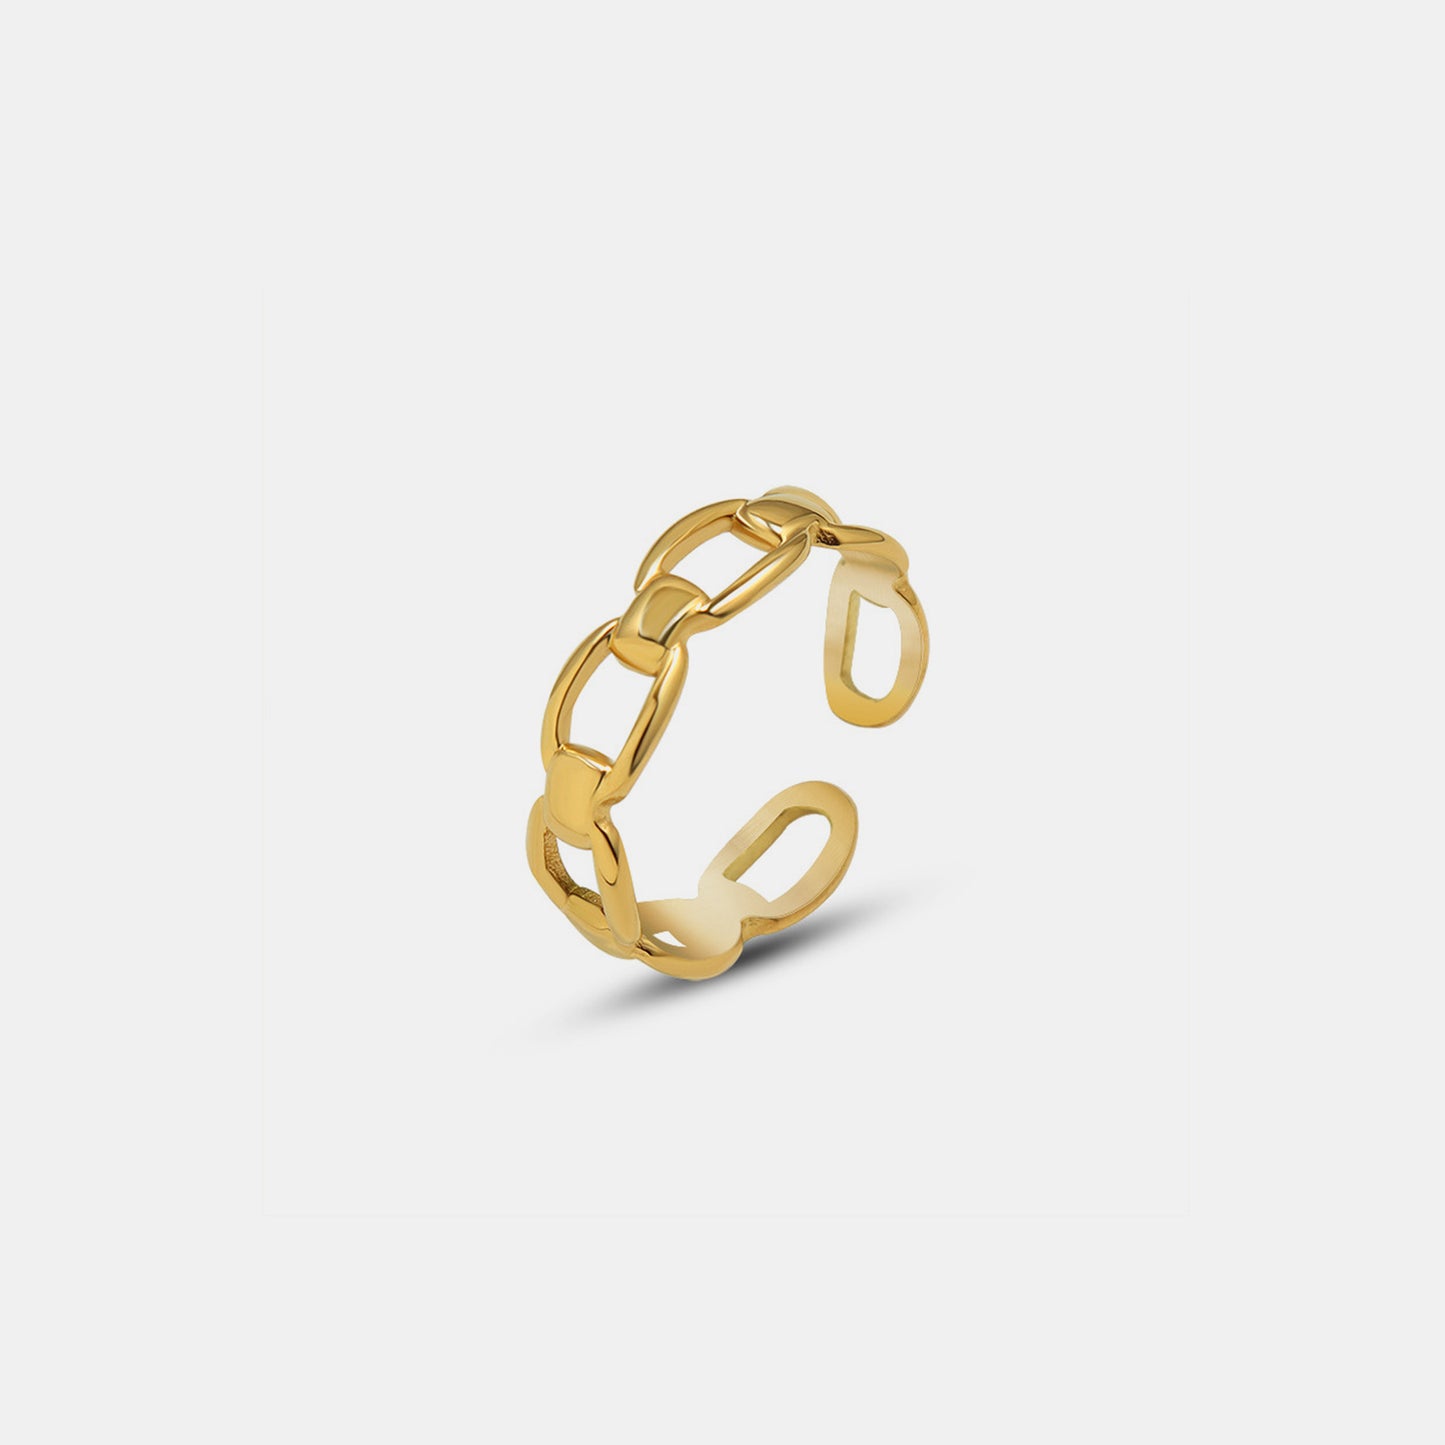 Titanium Steel Gold-Plated Adjustable Ring - House of Binx 